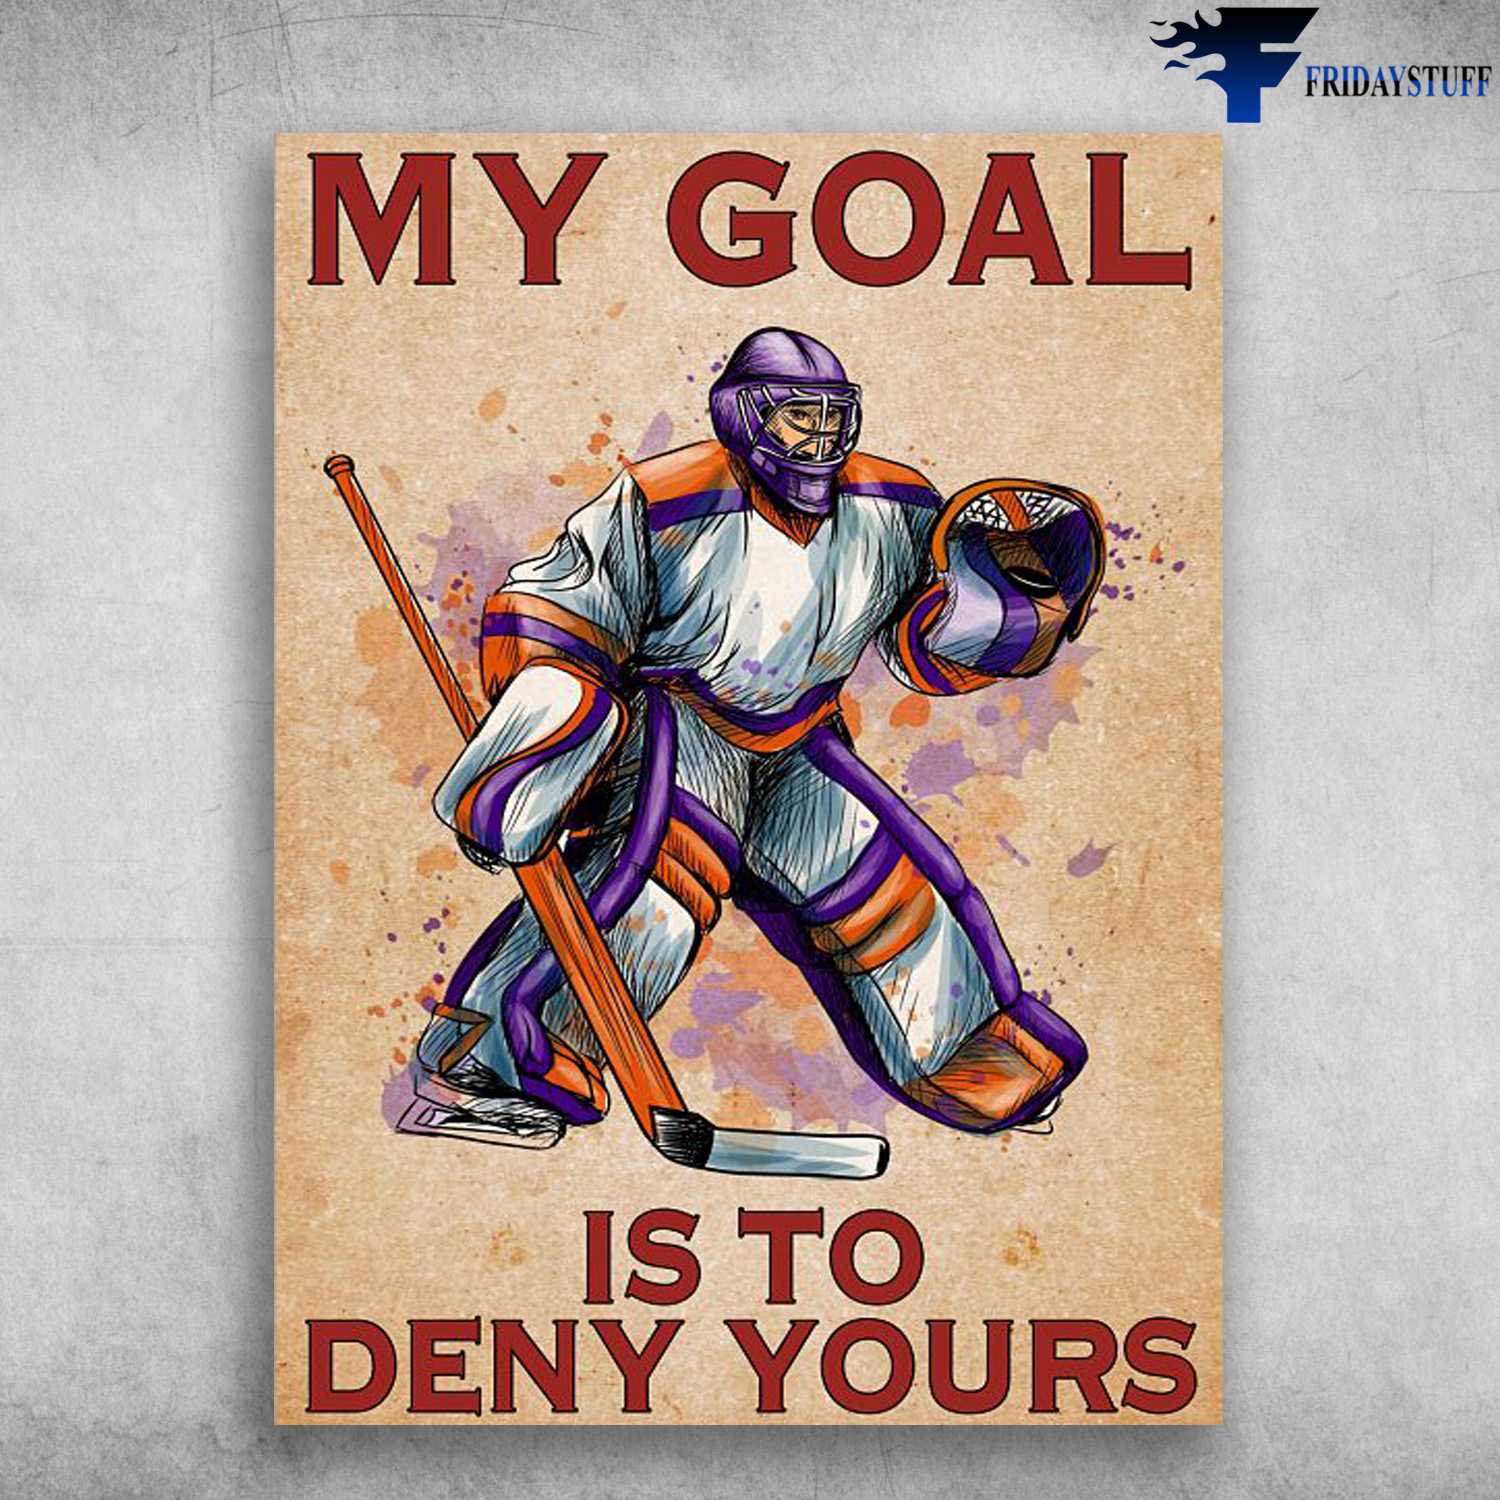 Hockey Player, Hockey Poster, My Goal Is To Deny Yours